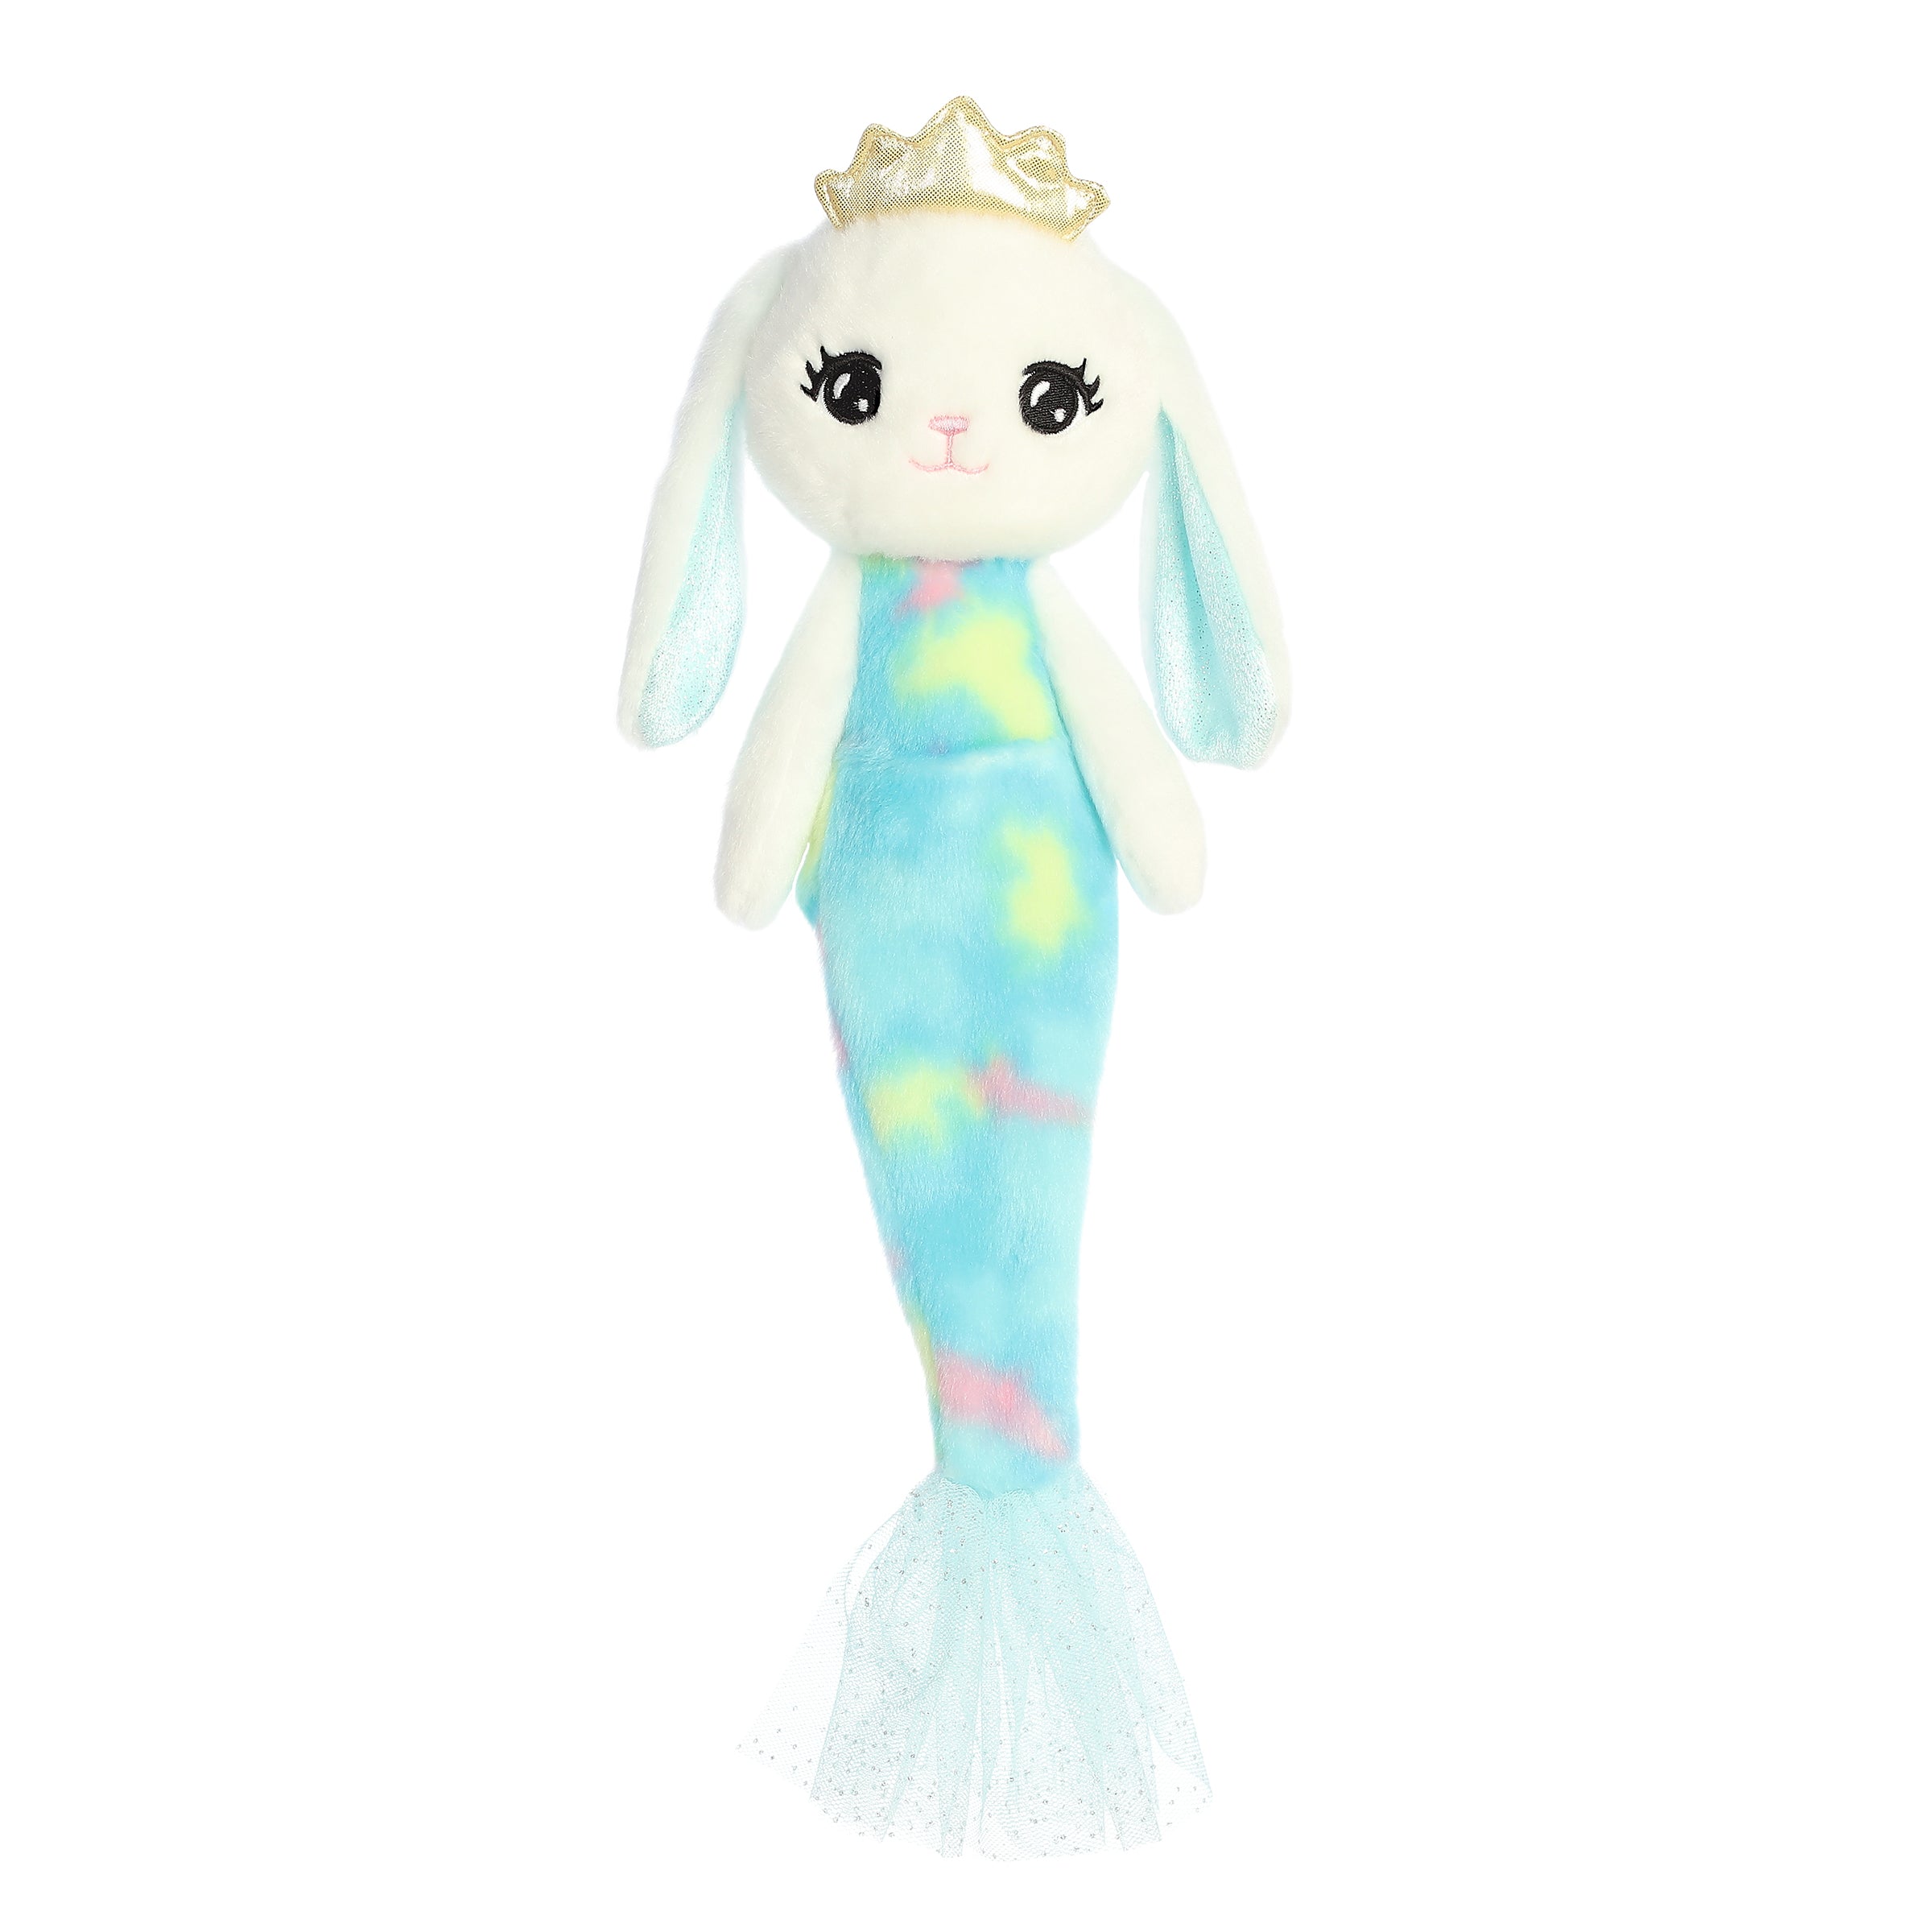 Bright white Merbunny plush with bunny ears & mermaid tail in sea green tulle, epitomizing ocean whimsy.